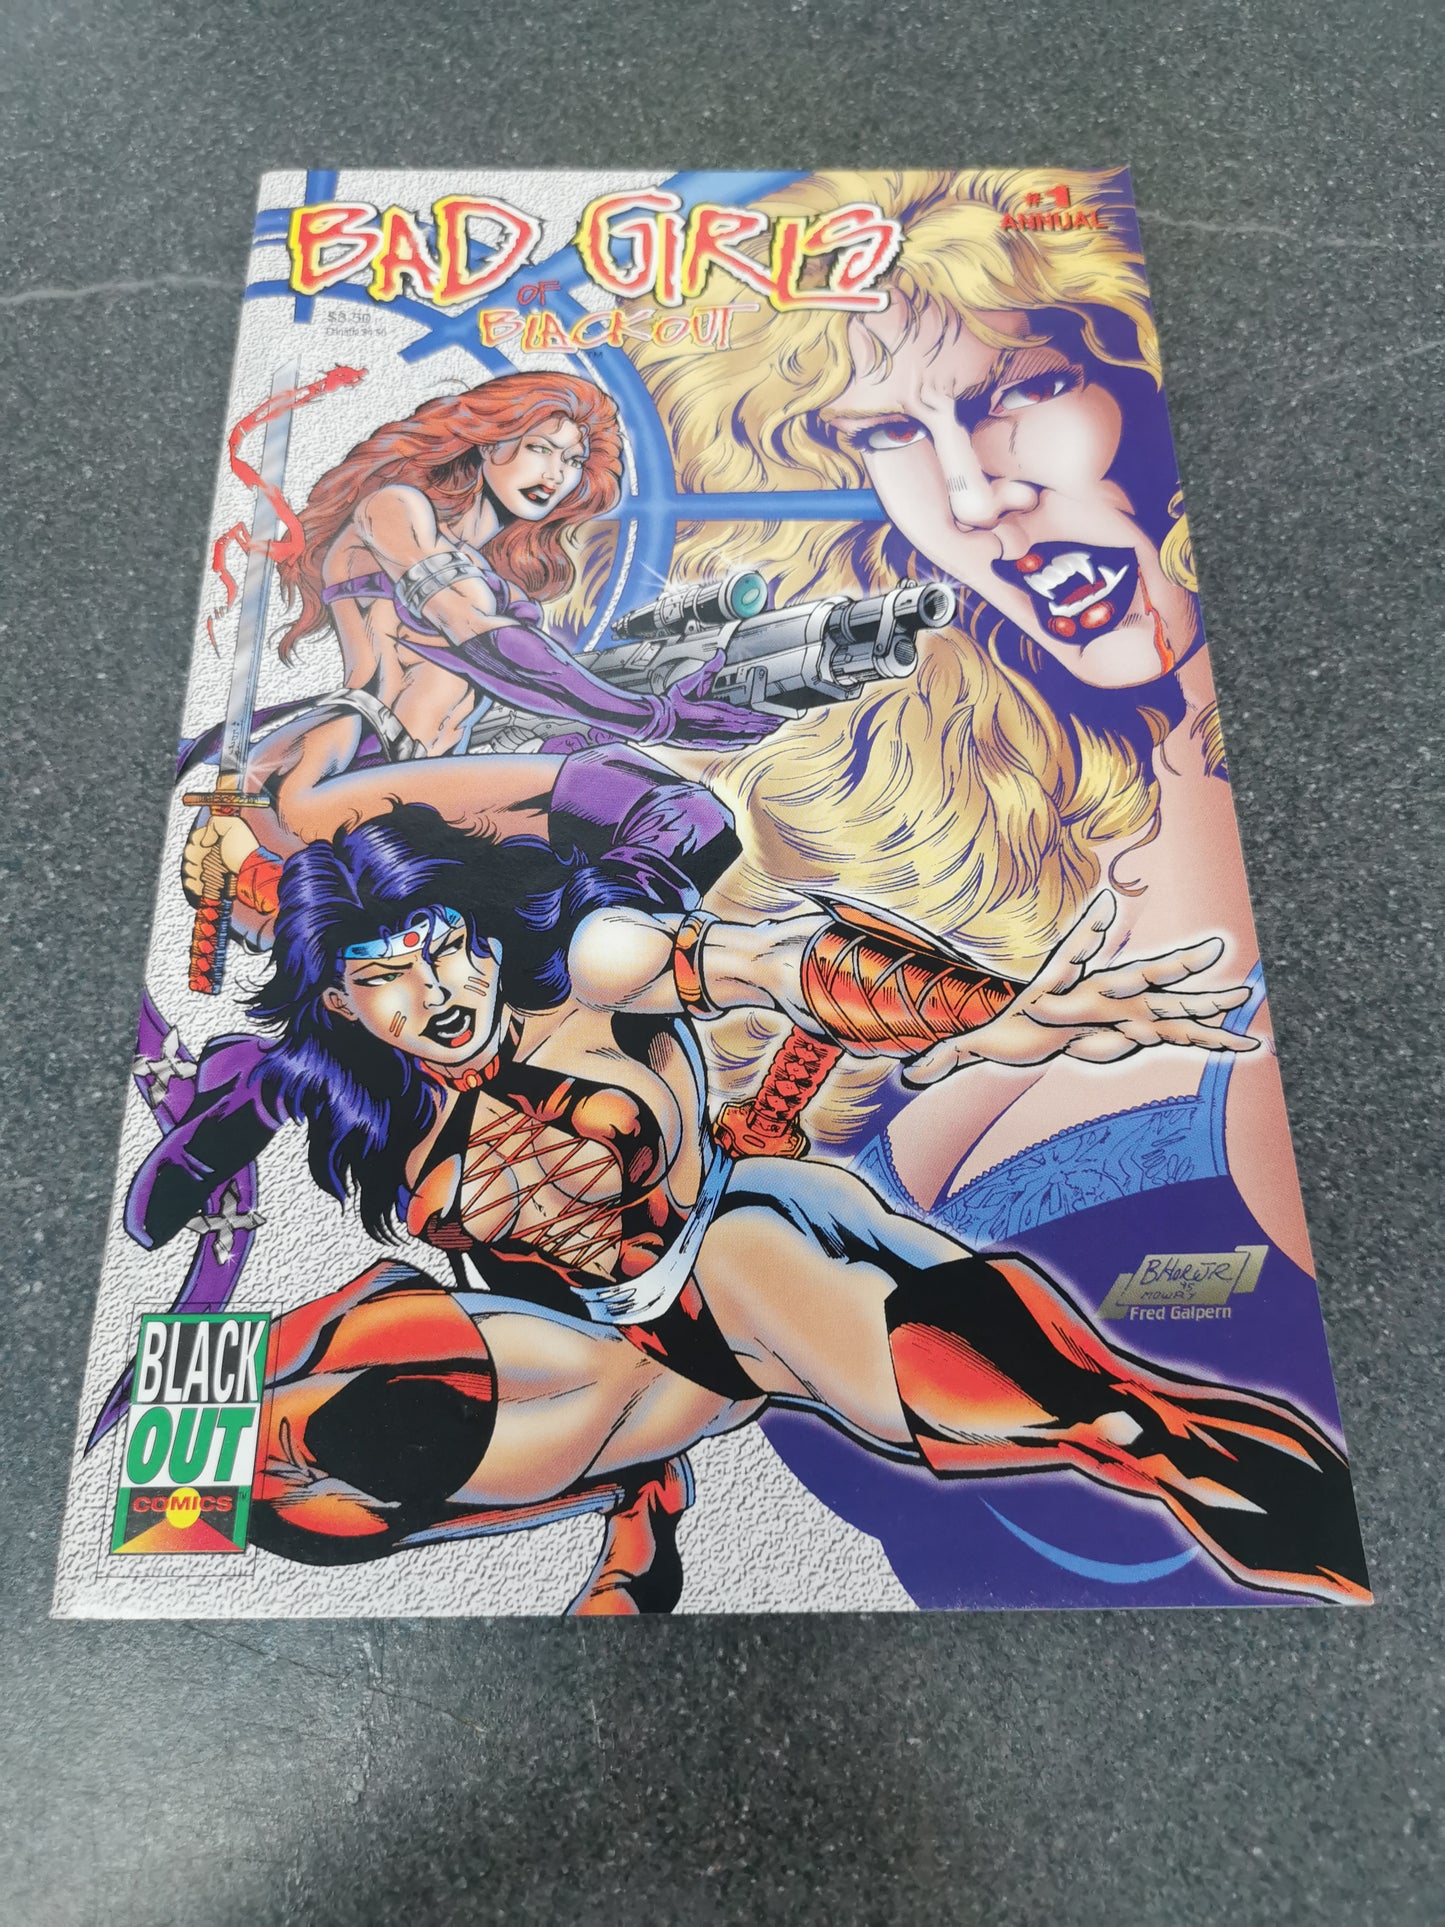 Bad Girls of Blackout Annual #1 1995 Blackout Comics